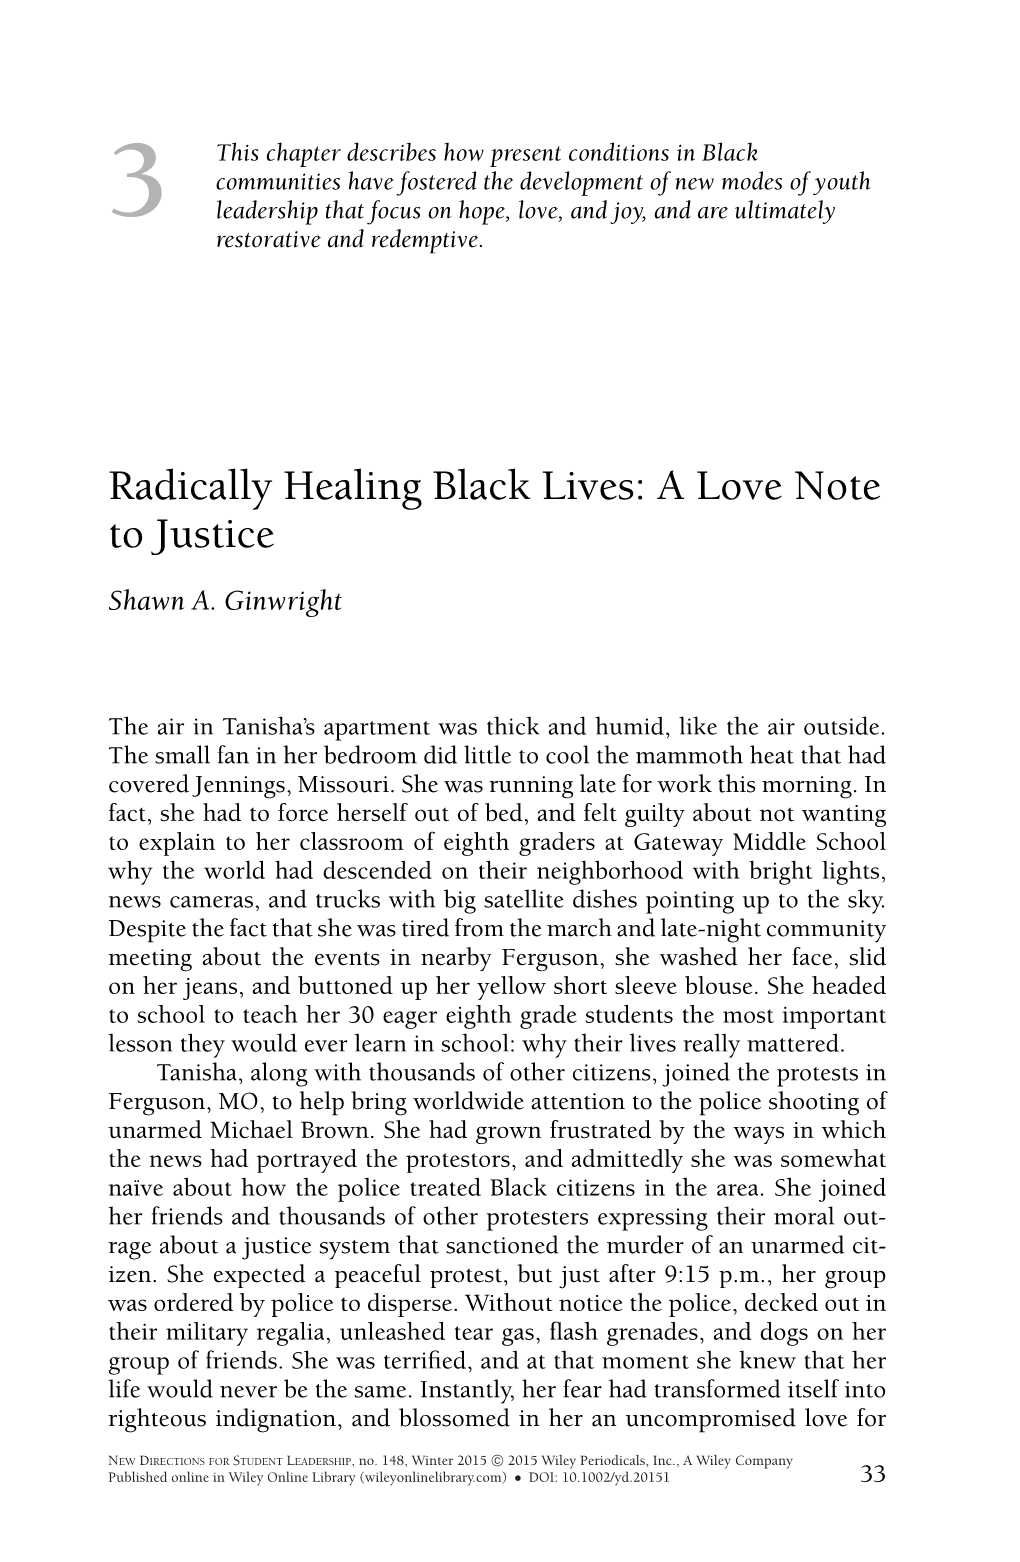 Radically Healing Black Lives: a Love Note to Justice